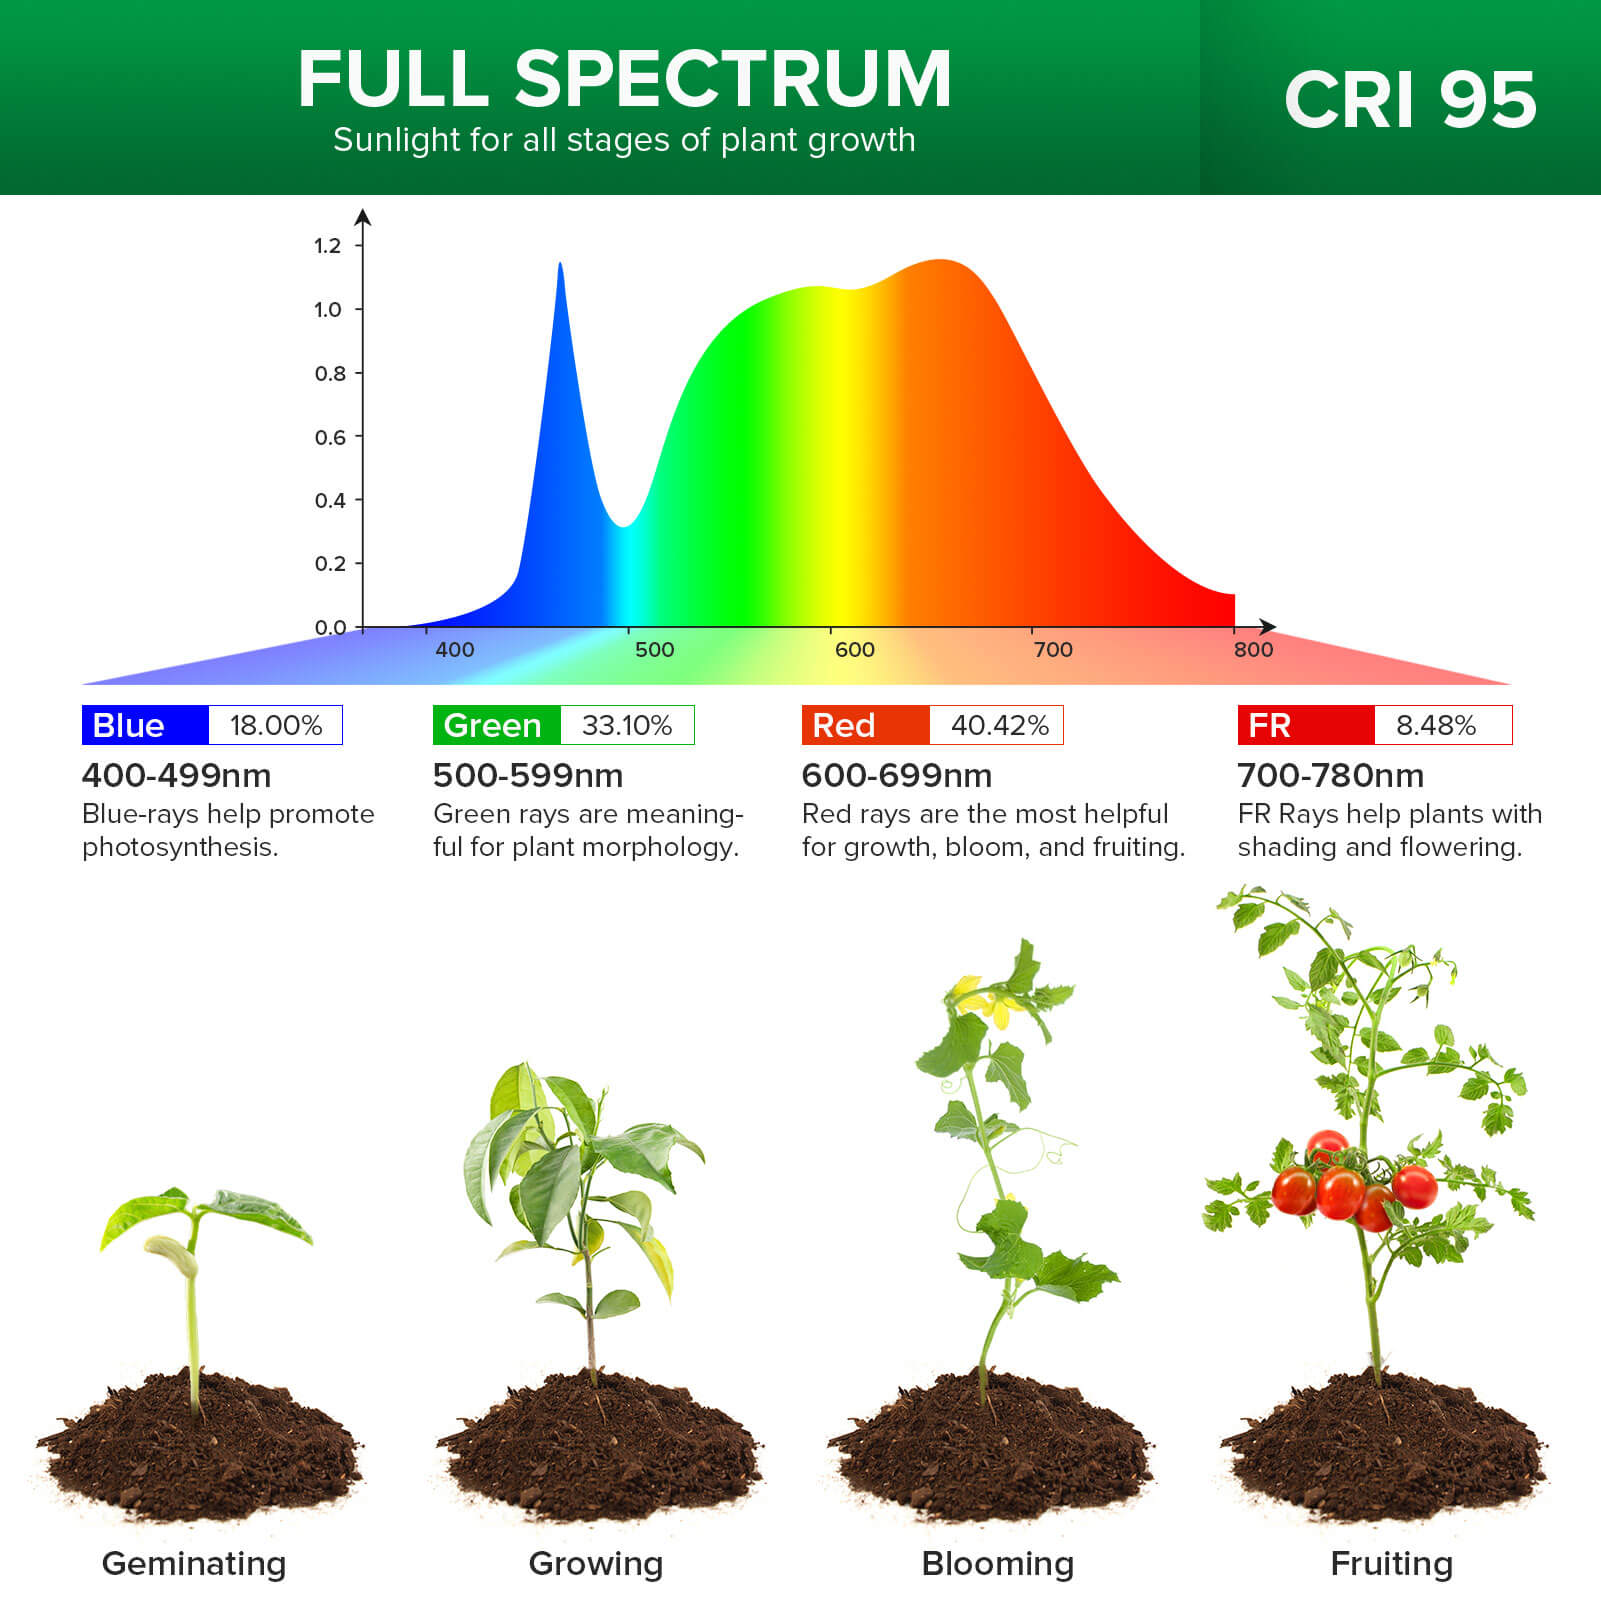 10W Adjustable 1-Head Clip-on LED Grow Light (US ONLY) is full spectrum，sunlight for all stages of plant growth，CRI 95.